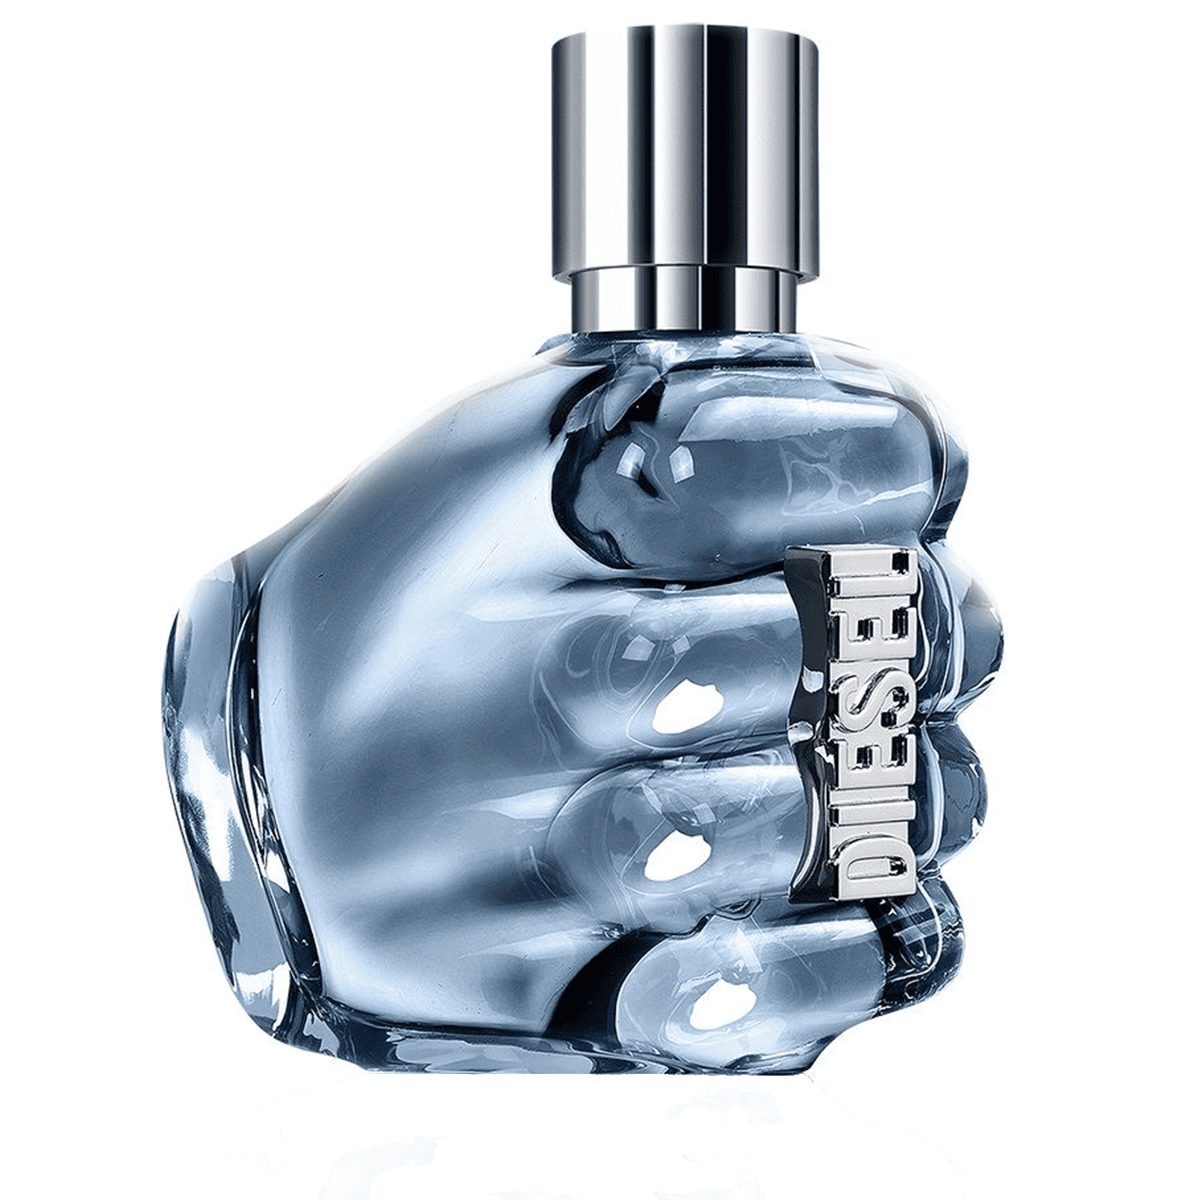 Perfume Ego 215 Only The Brave Extreme Diesel Ref Olf 60ml